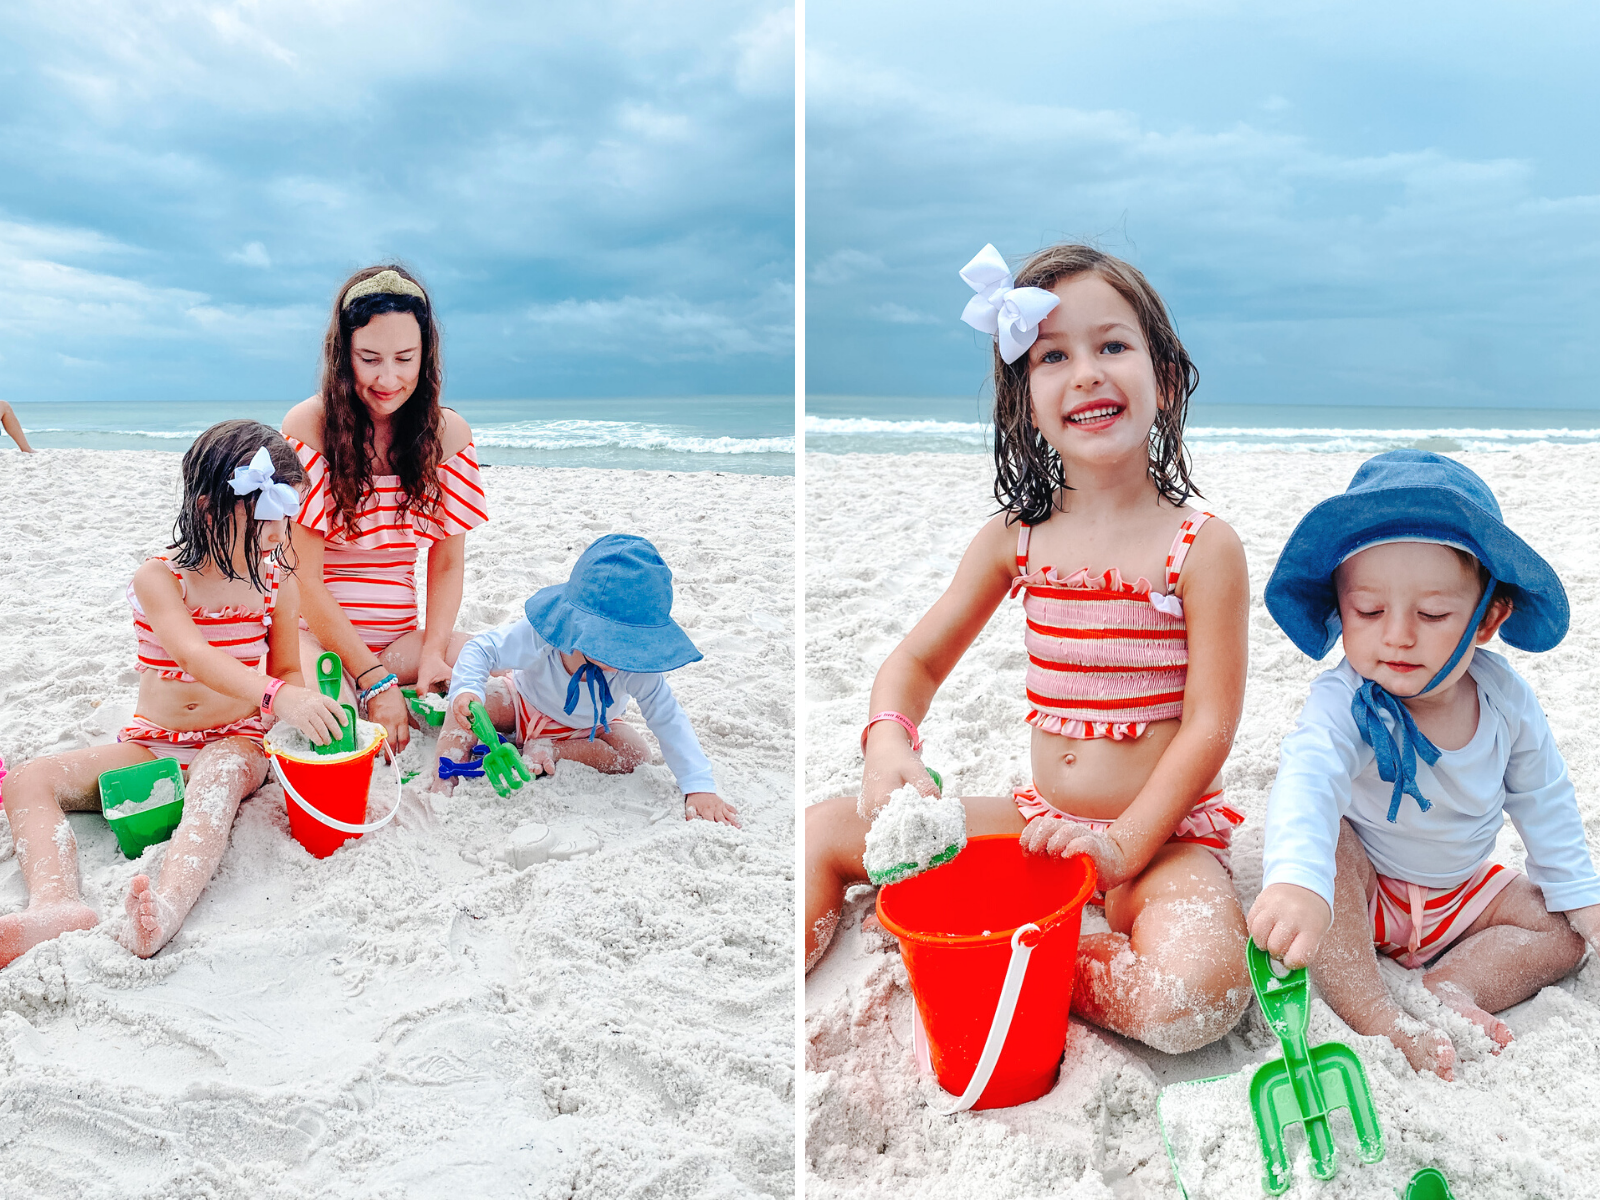 Panama City Beach Attractions by popular Memphis travel blog, Lone Star Looking Glass: collage image of a mom and her two young children playing in the sand on Panama City Beach. 